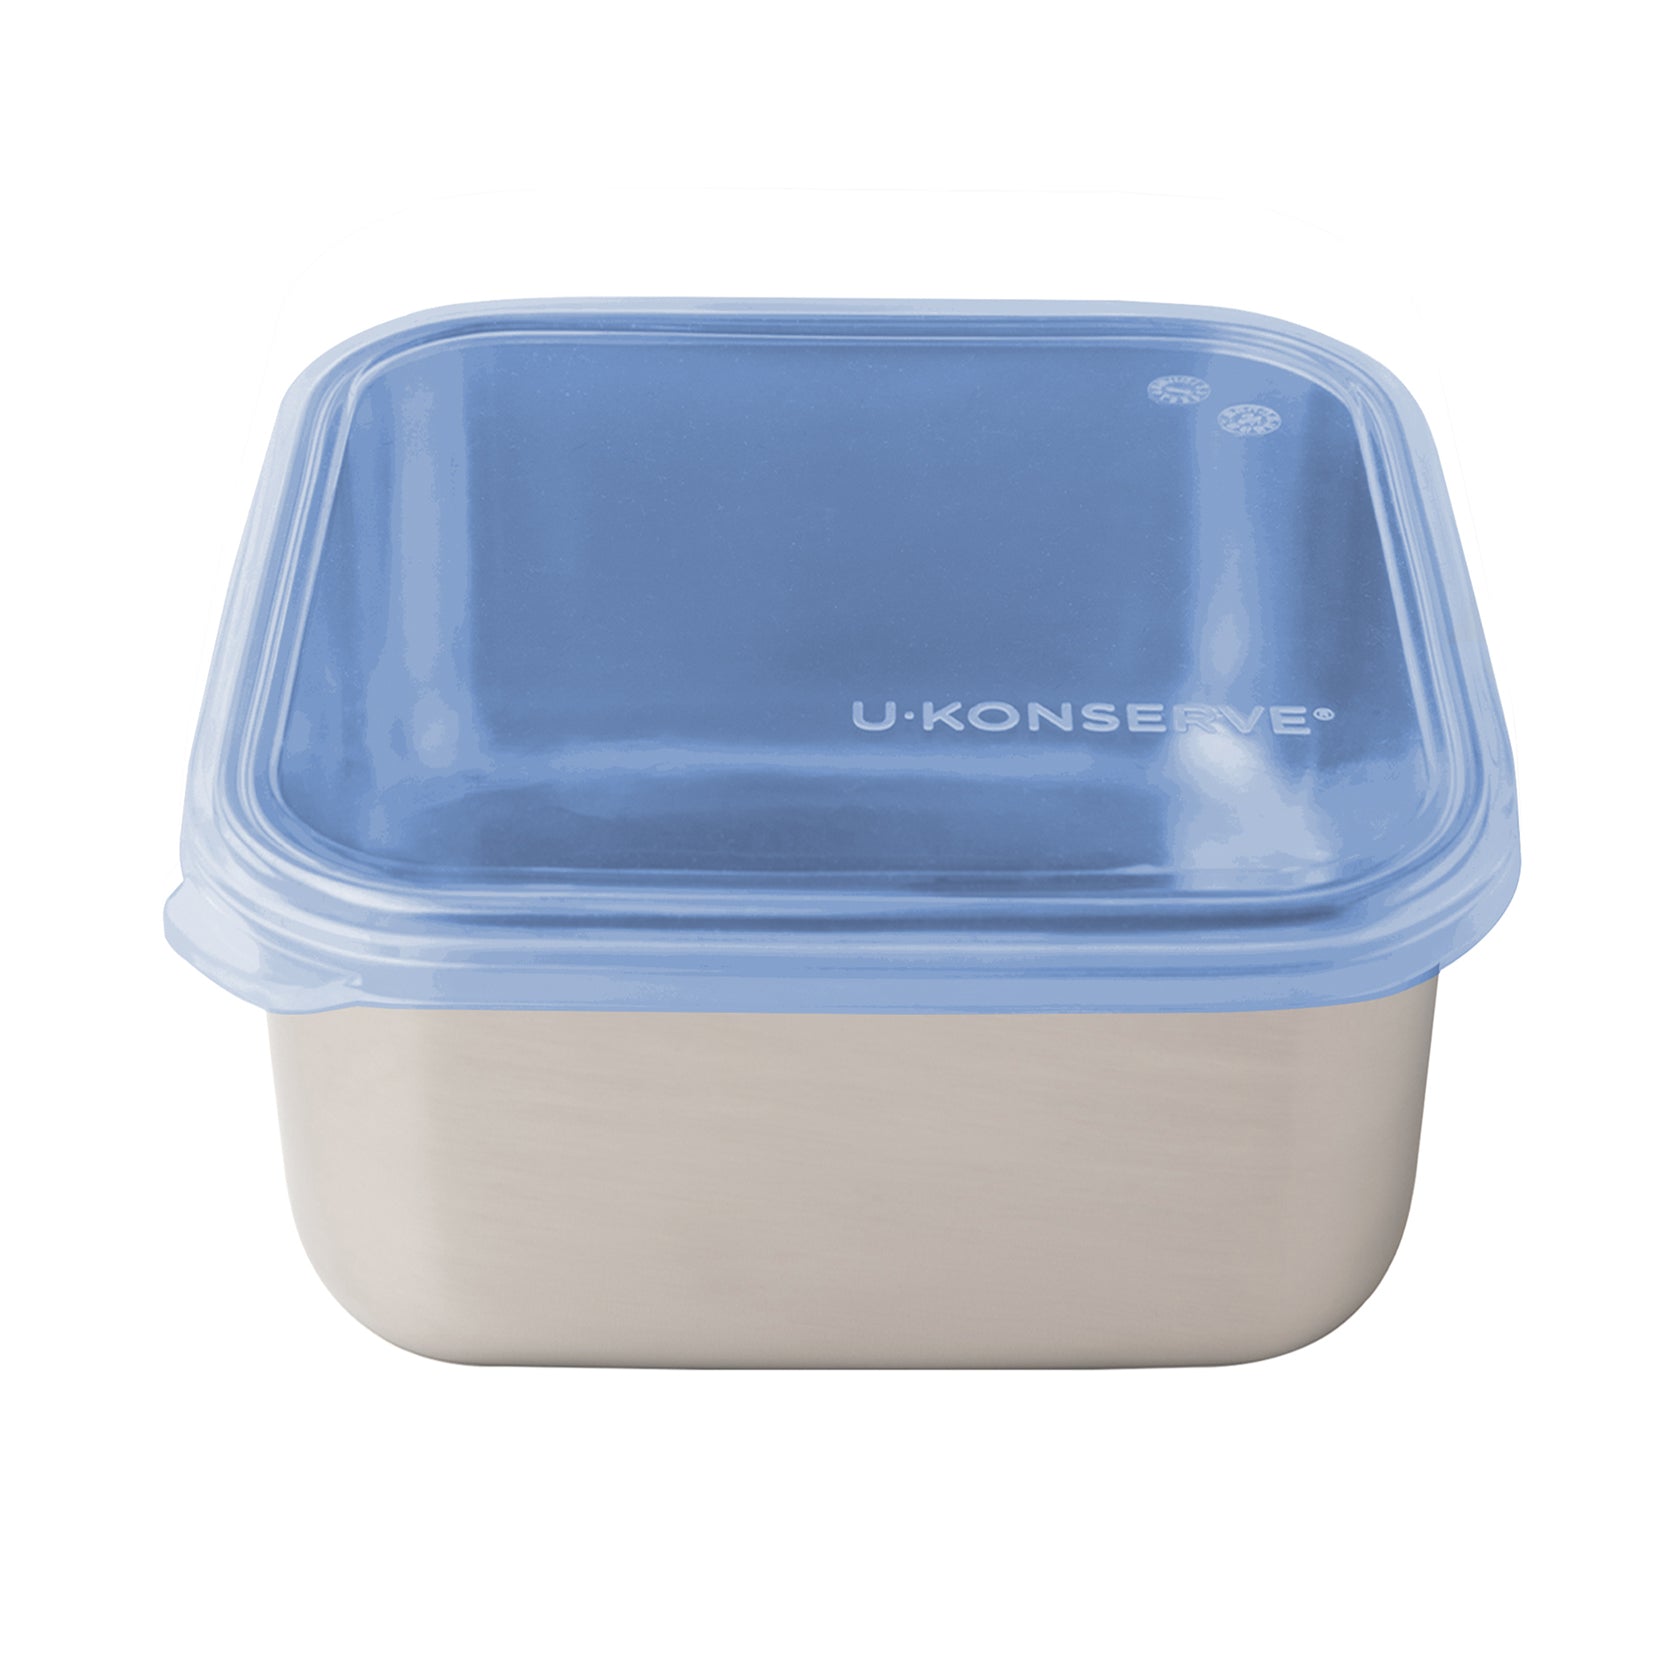 Plastic containers and lids